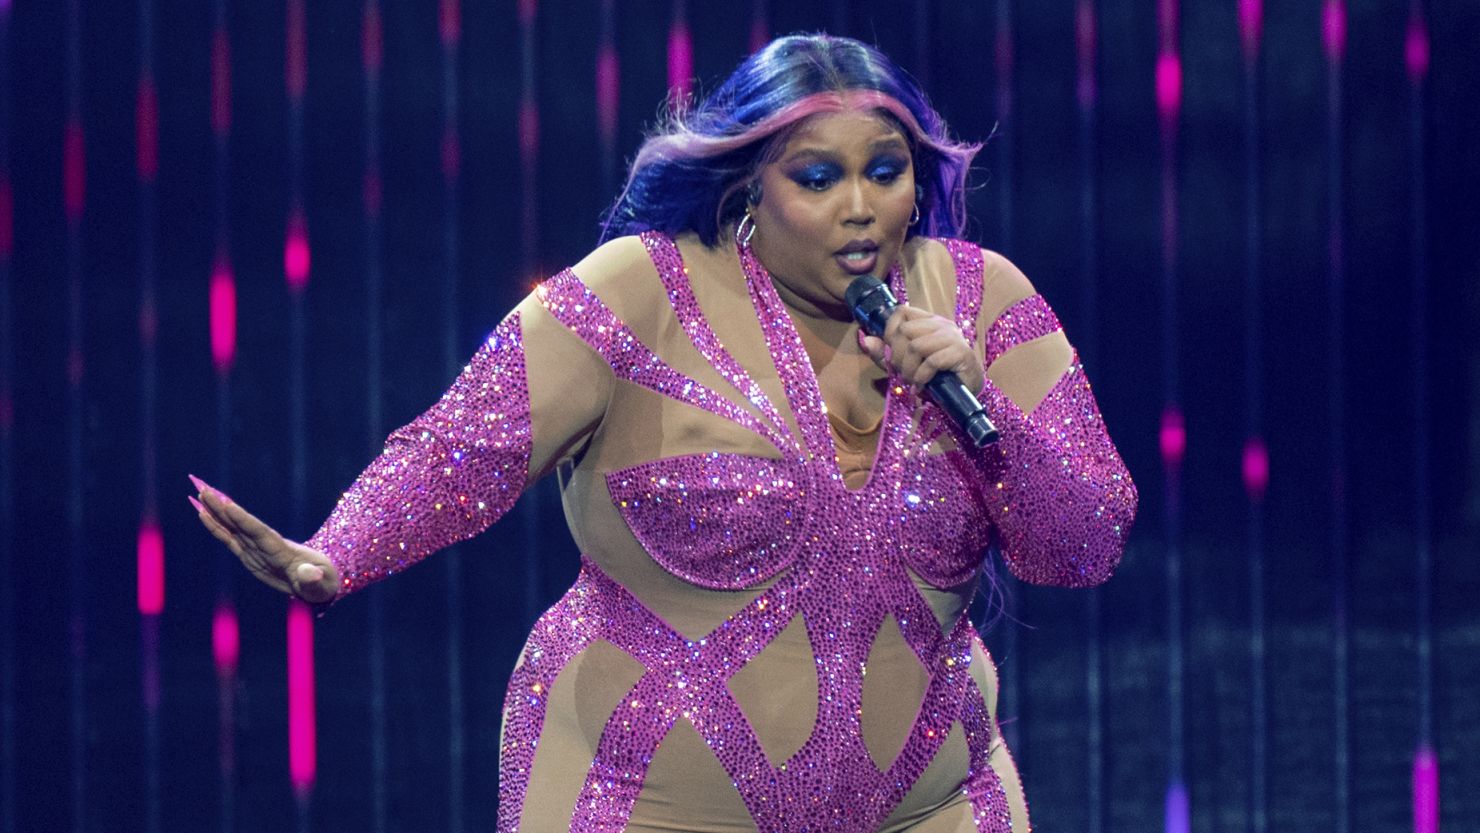 Lizzo to perform as musical guest on 'Saturday Night Live' for